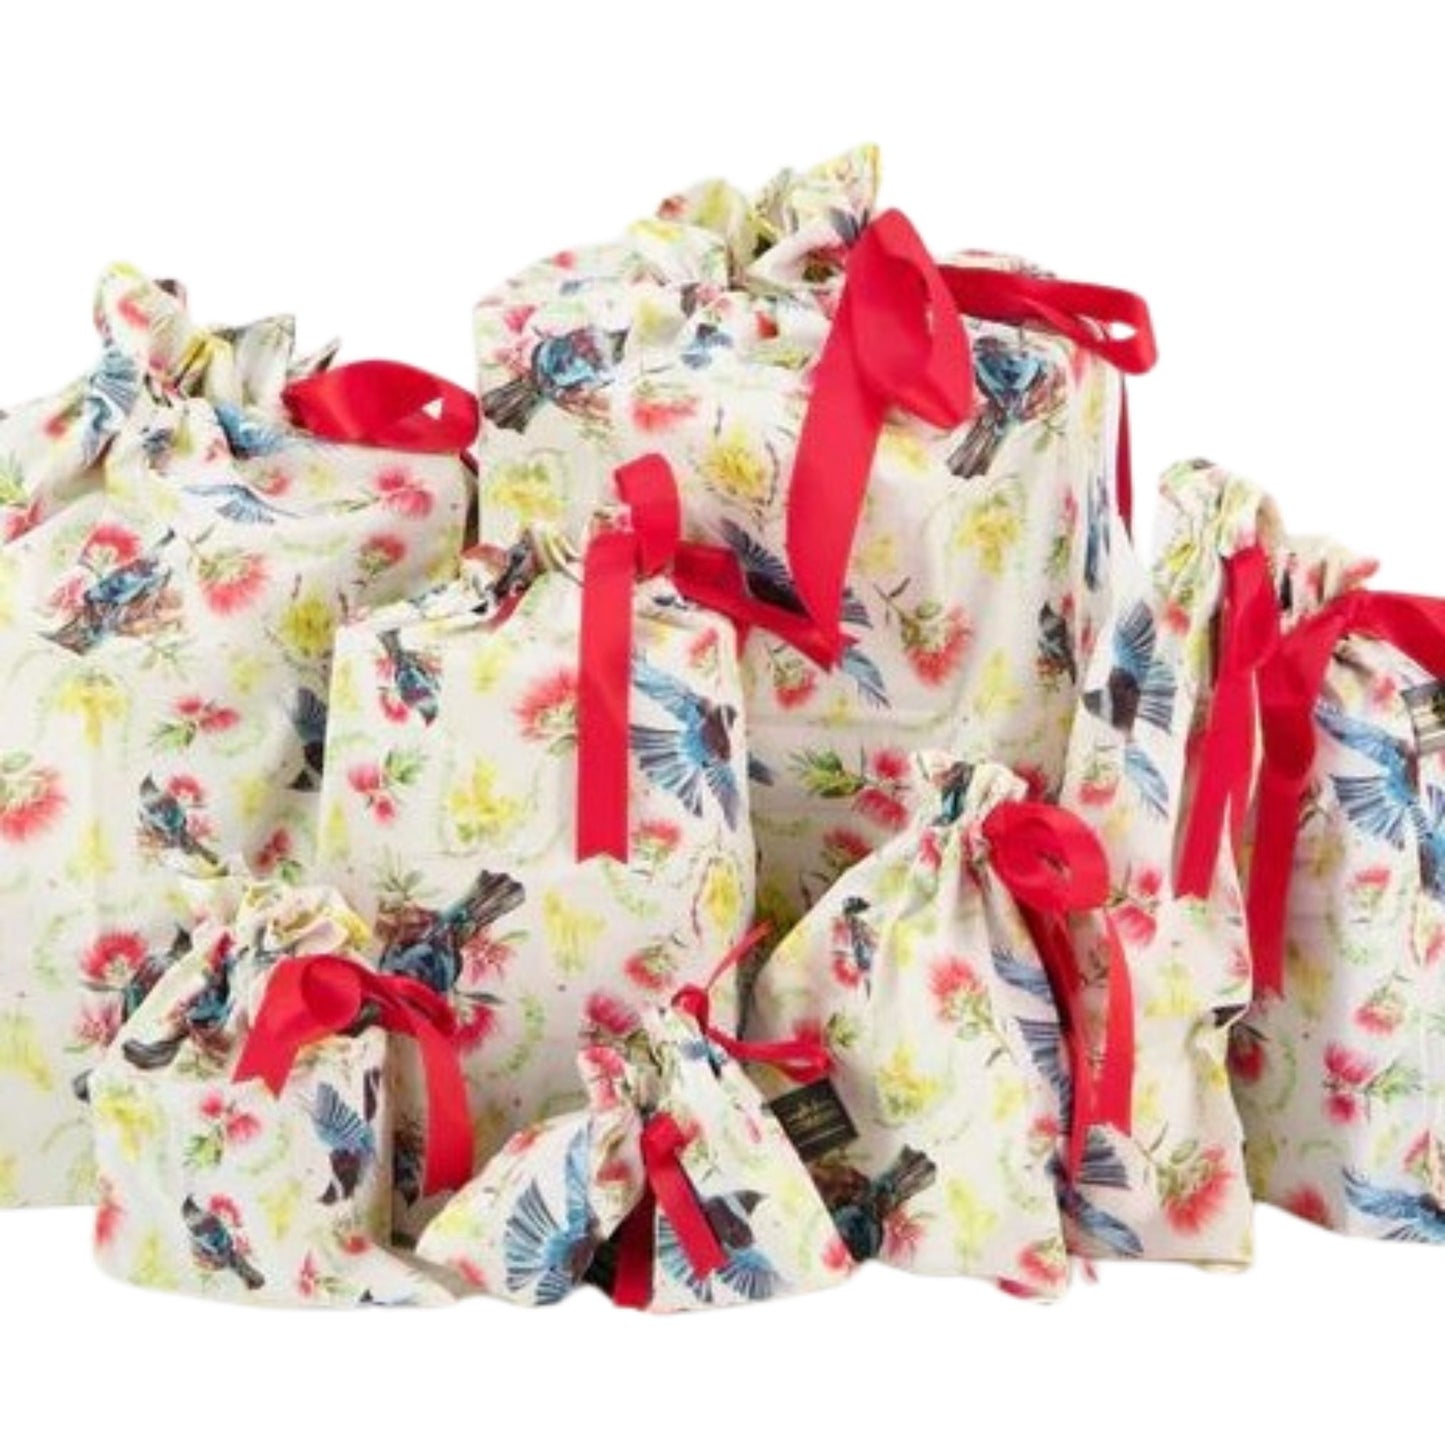 Reuseable gift bags with a native NZ Fauna and Flora design